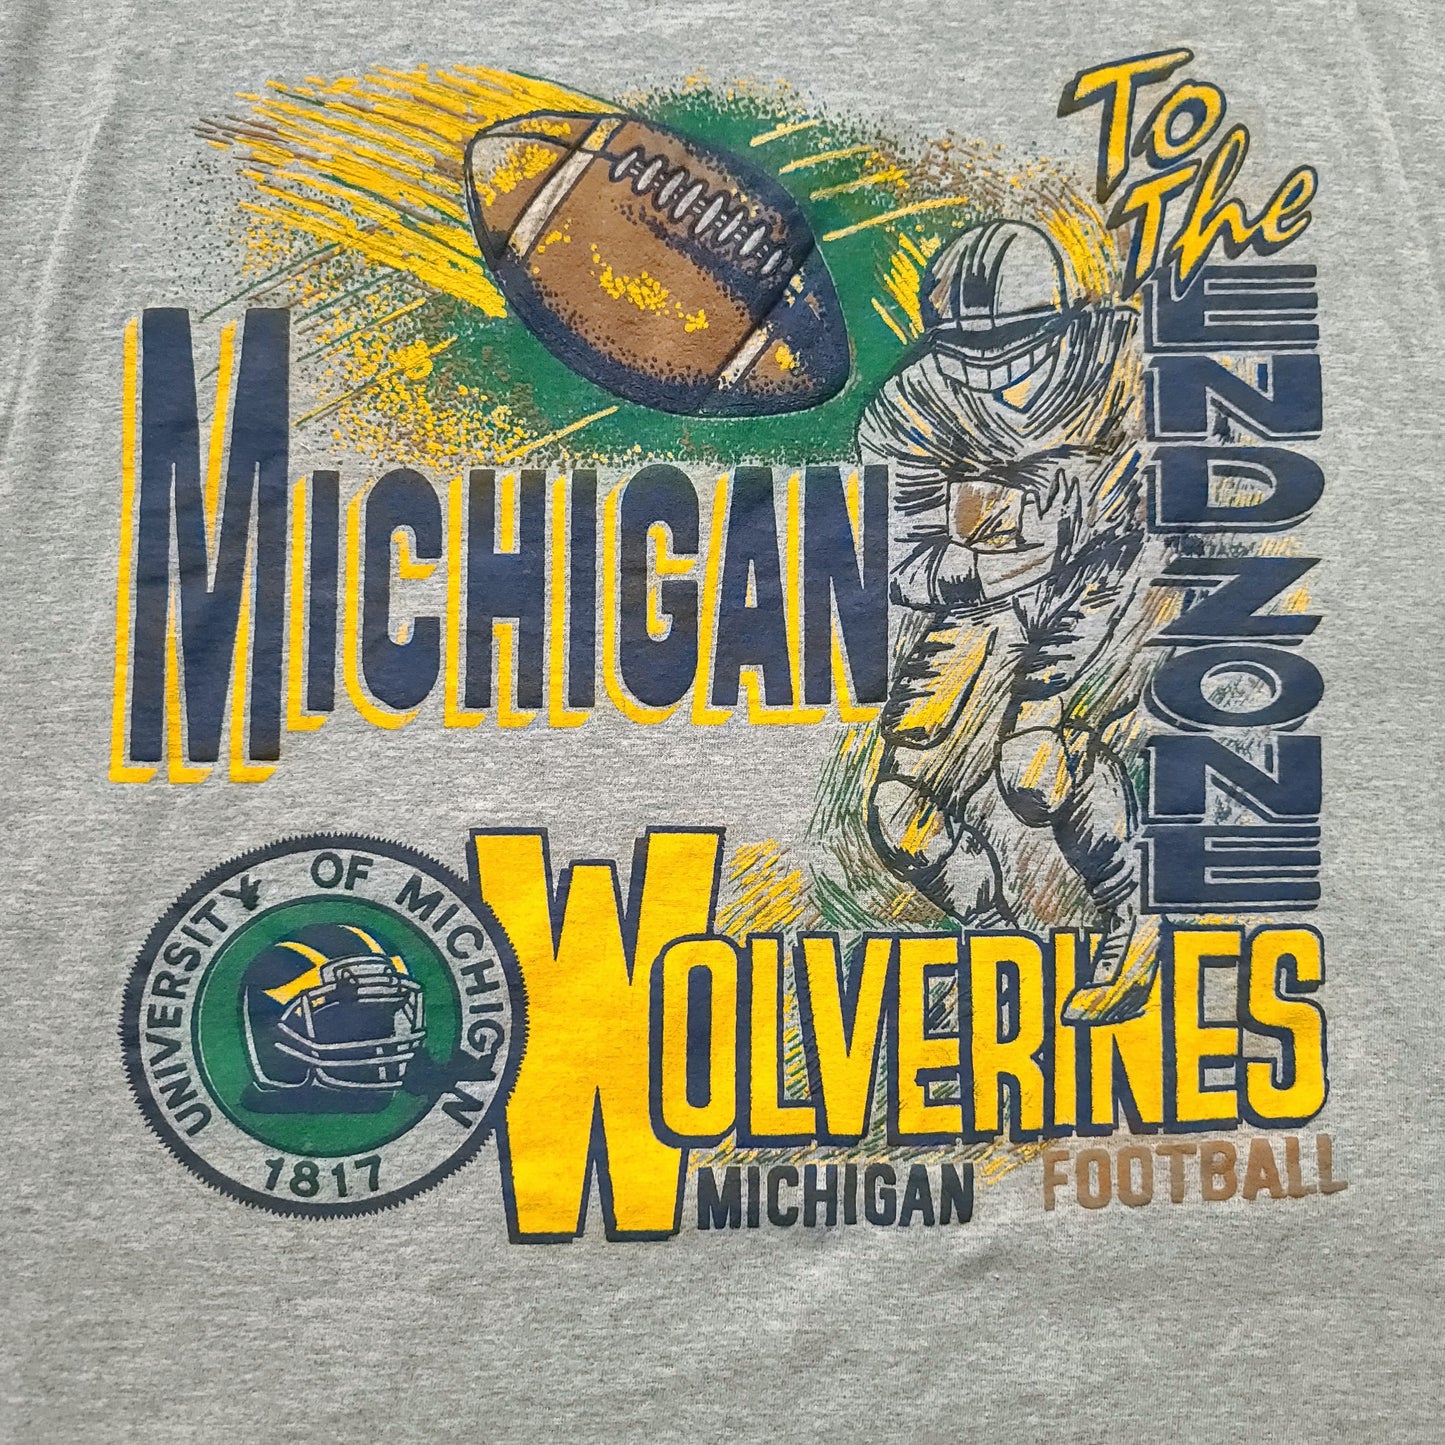 Vintage University of Michigan Wolverines Football To The End Zone Raglan